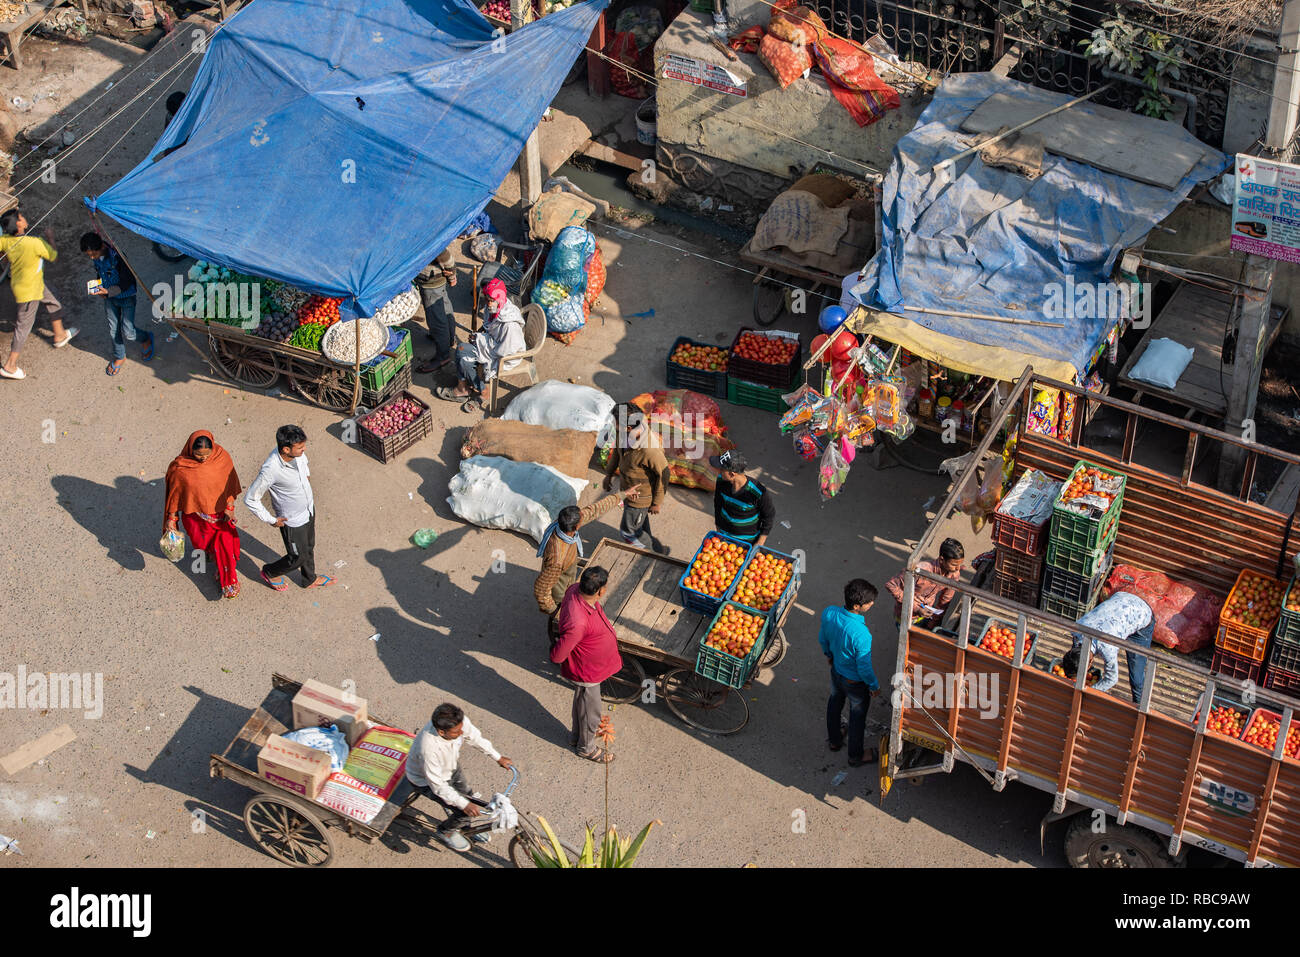 Market stalls are being loaded with fresh produce in preparation for the day ahead in the marketplace in JJ Colony Madanpur Khadar, New Delhi, India Stock Photo